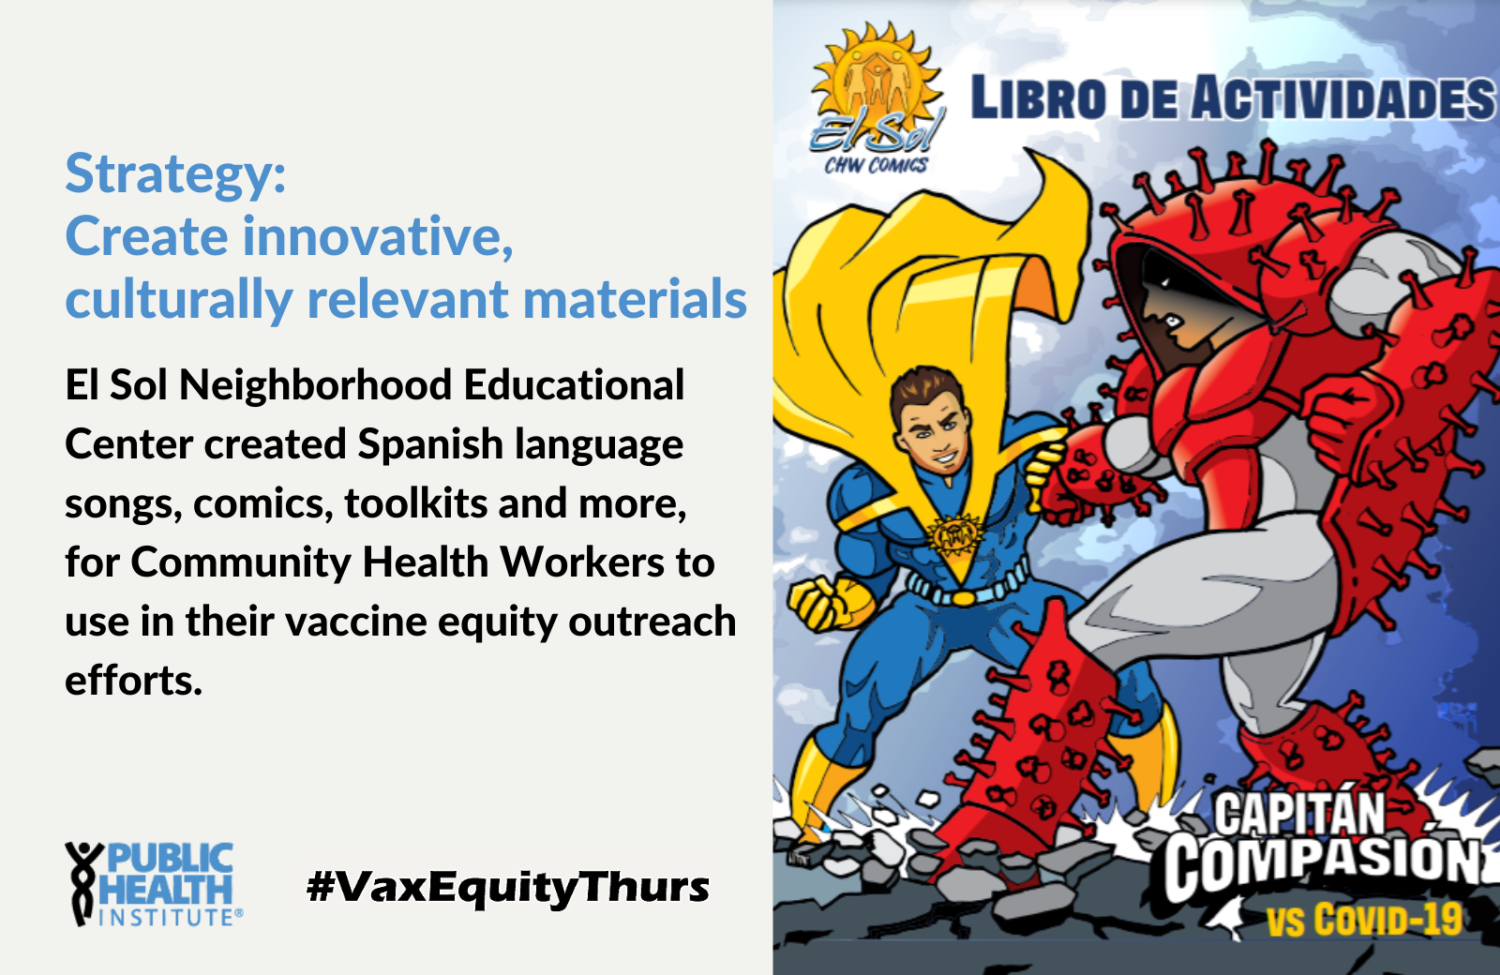 Strategy: Create innovative, culturally relevant materials El Sol Neighborhood Educational Center created Spanish language songs, comics, toolkits and more, for Community Health Workers to use in their vaccine equity outreach efforts.